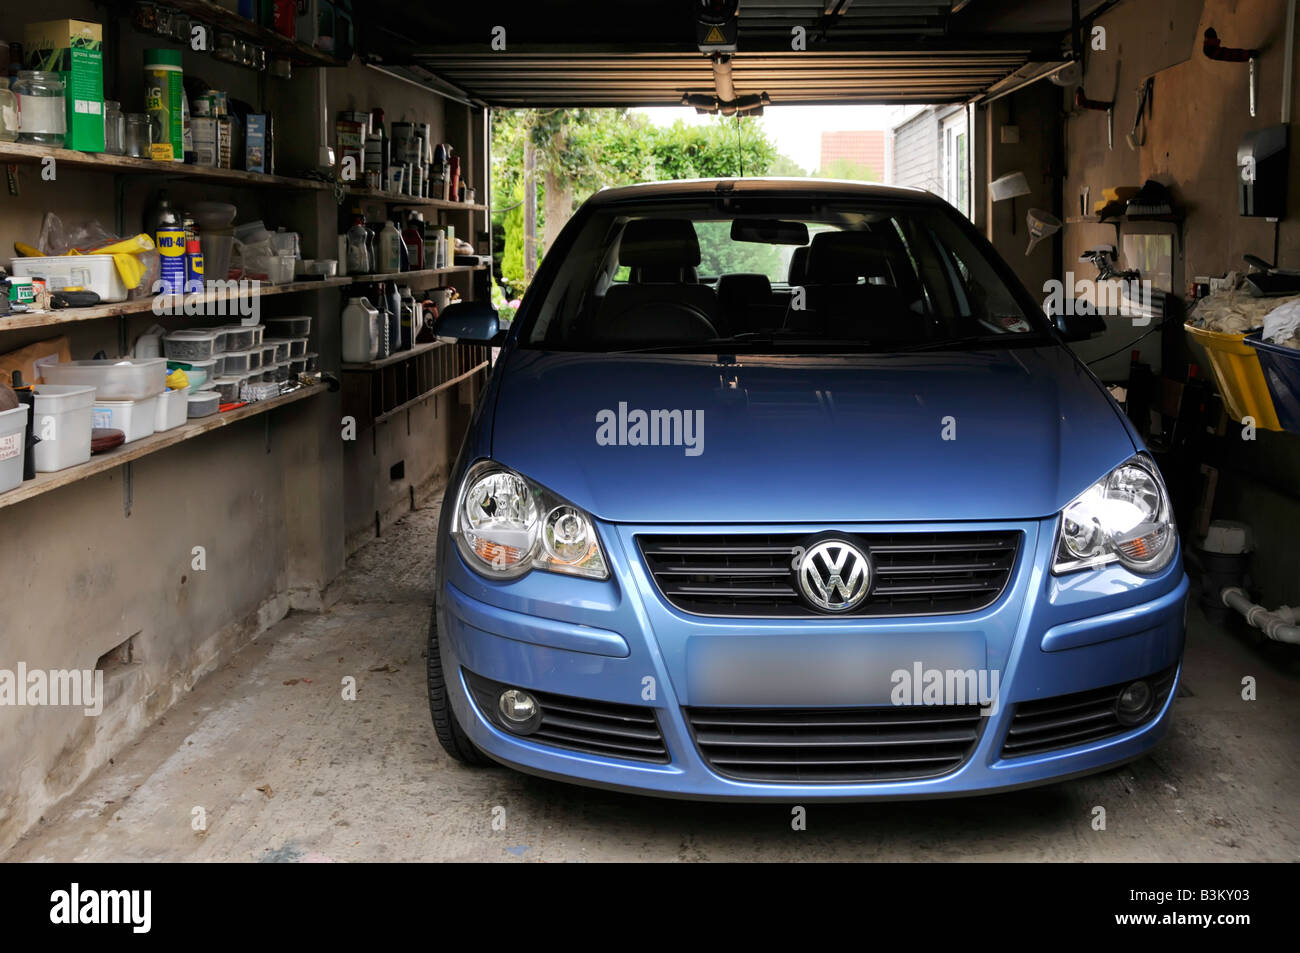 Volkswagen VW Polo car parked in attached house residential property garage  shelving for storage of sundry household paraphernalia & tools England UK  Stock Photo - Alamy